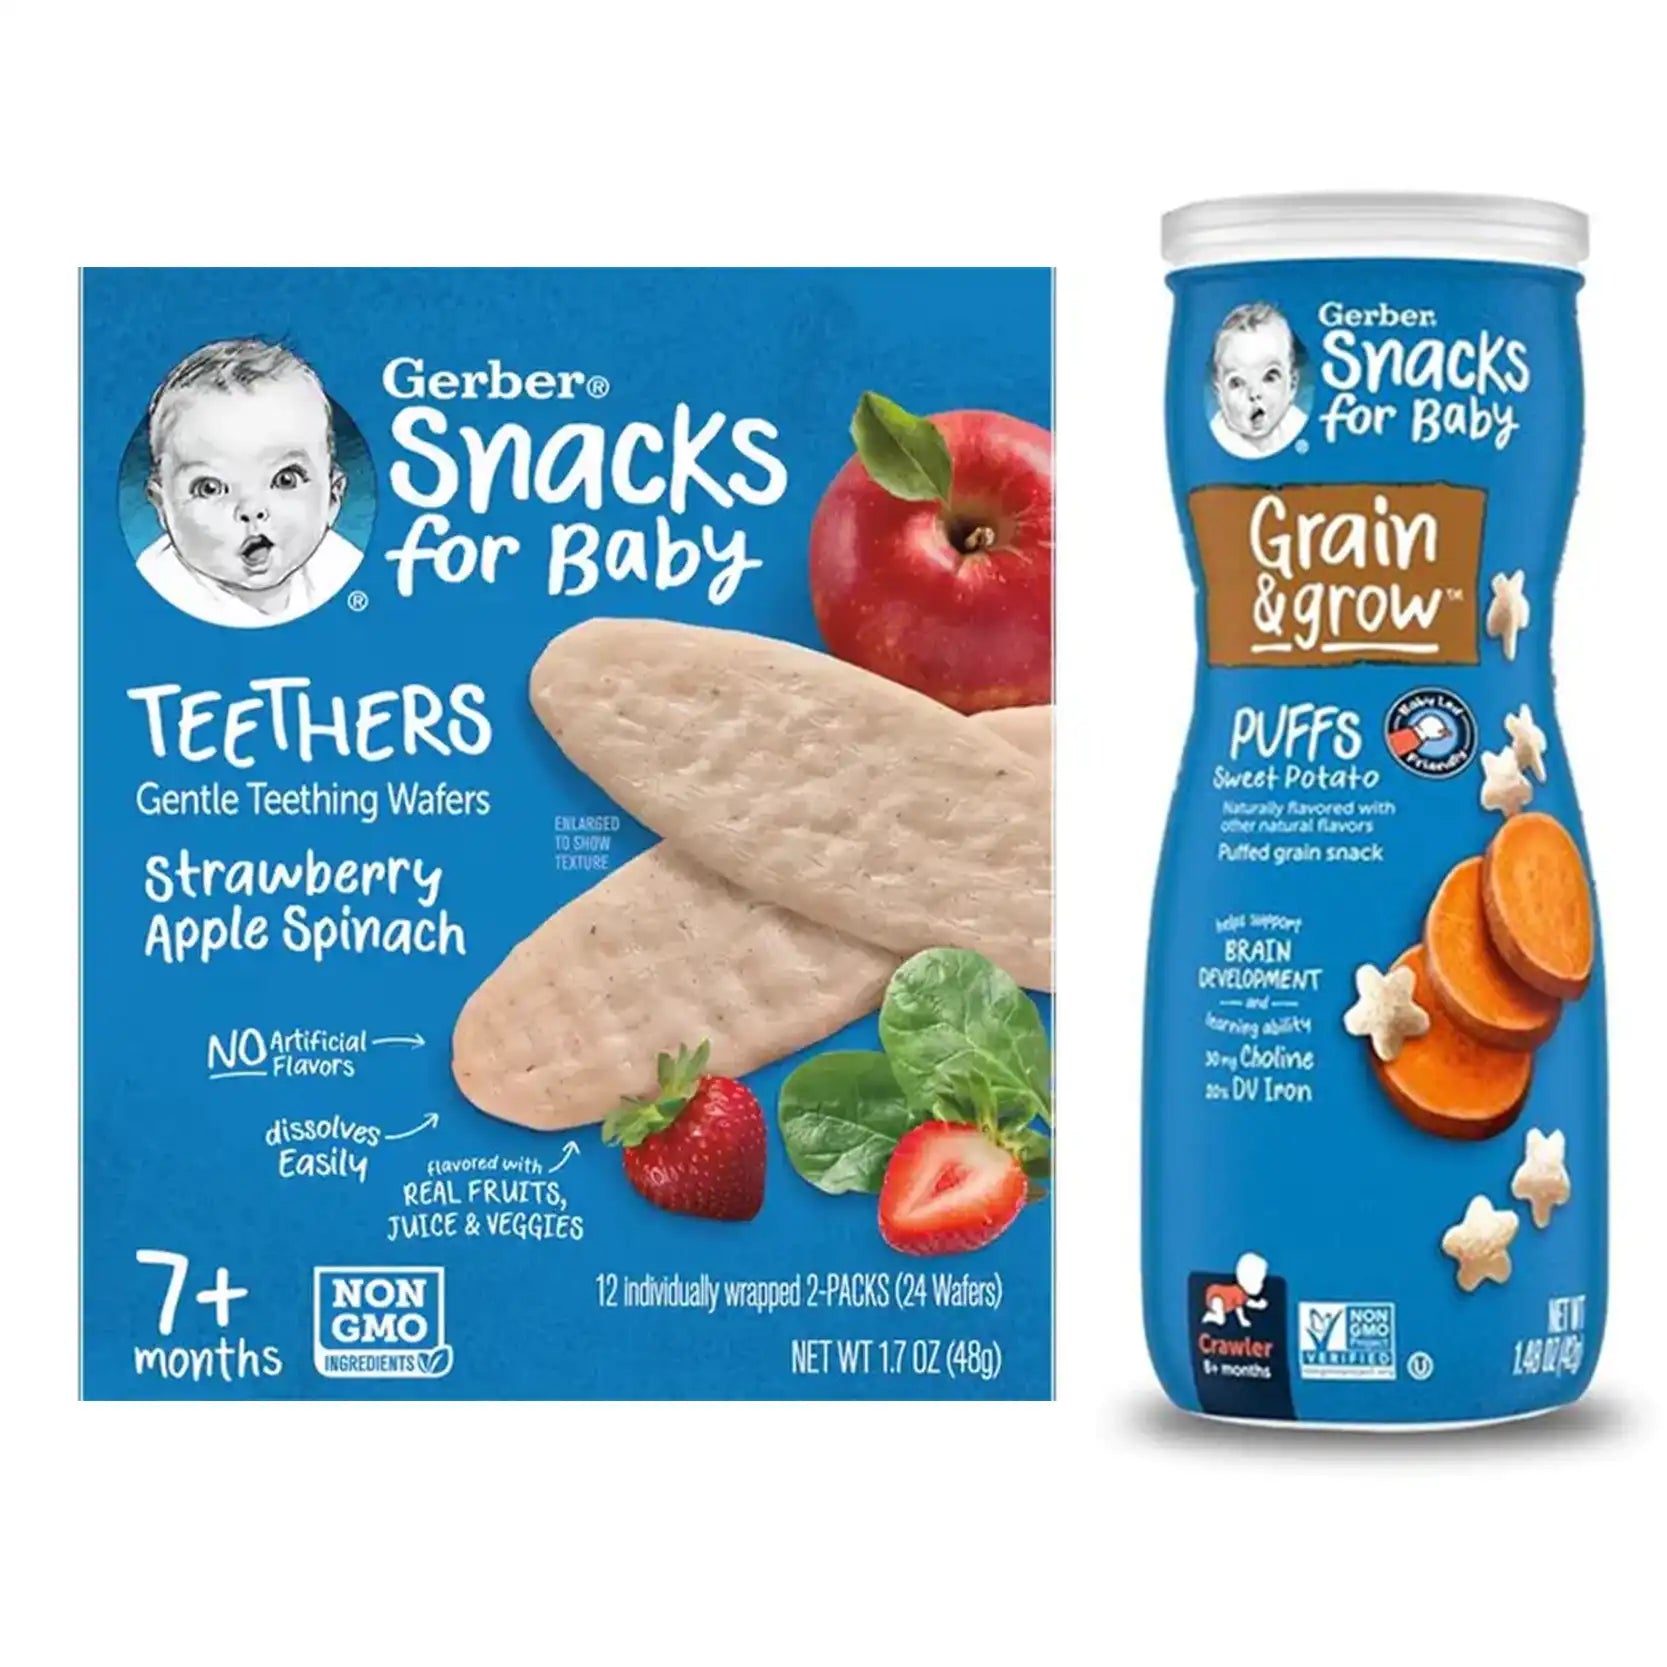 Buy Gerber Gentle Teething Wafers & Puffs for Babies - (Combo Pack) Online in India at uyyaala.com